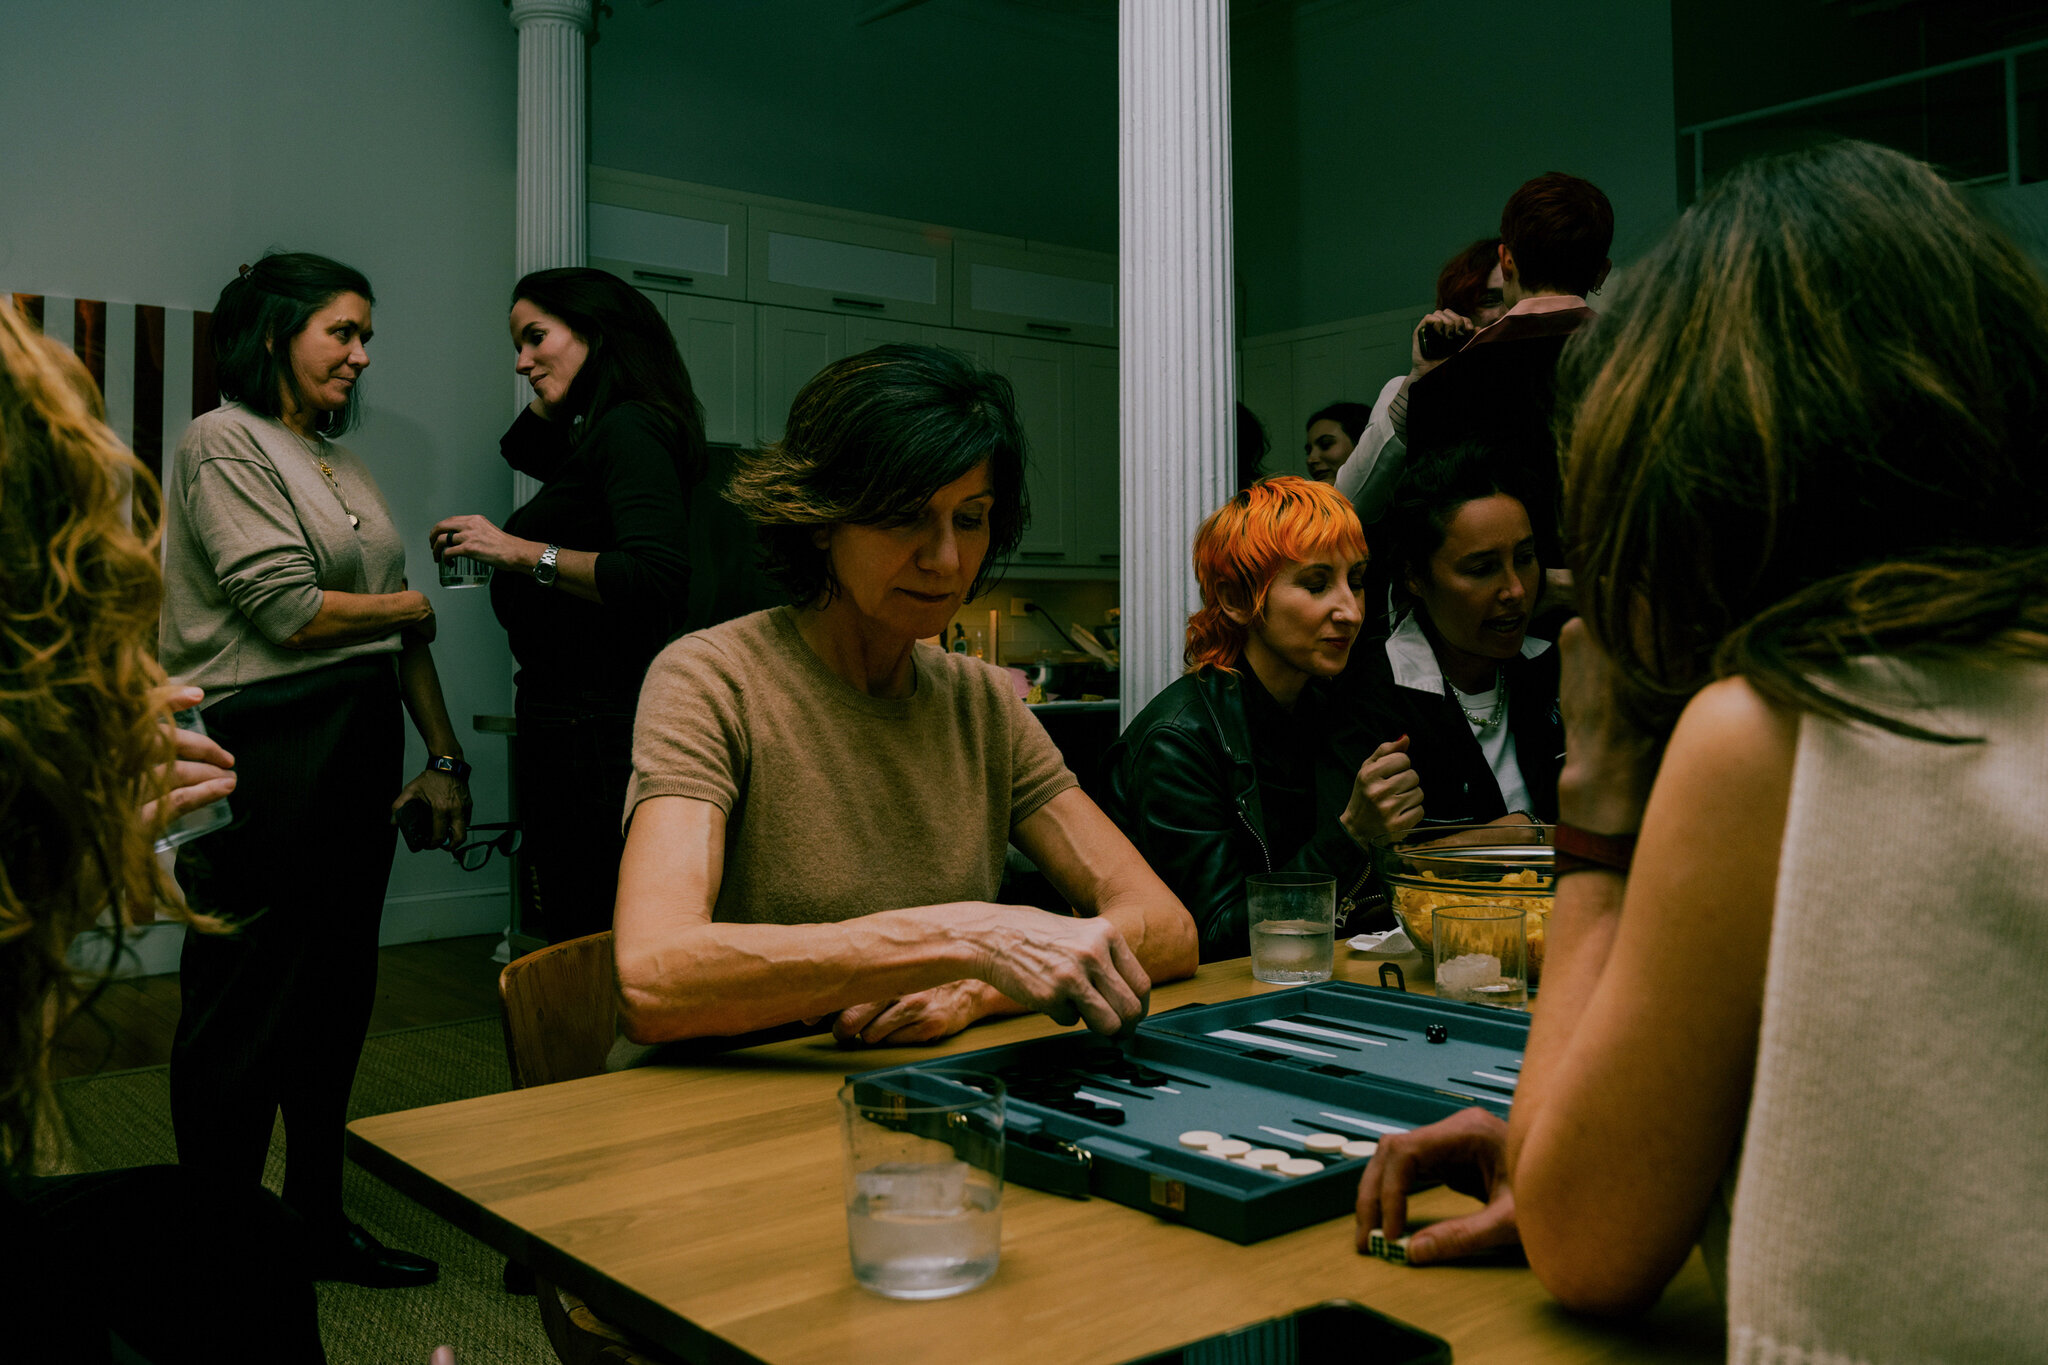 The art dealer at New York’s Lesbian and Bisexual Backgammon League.